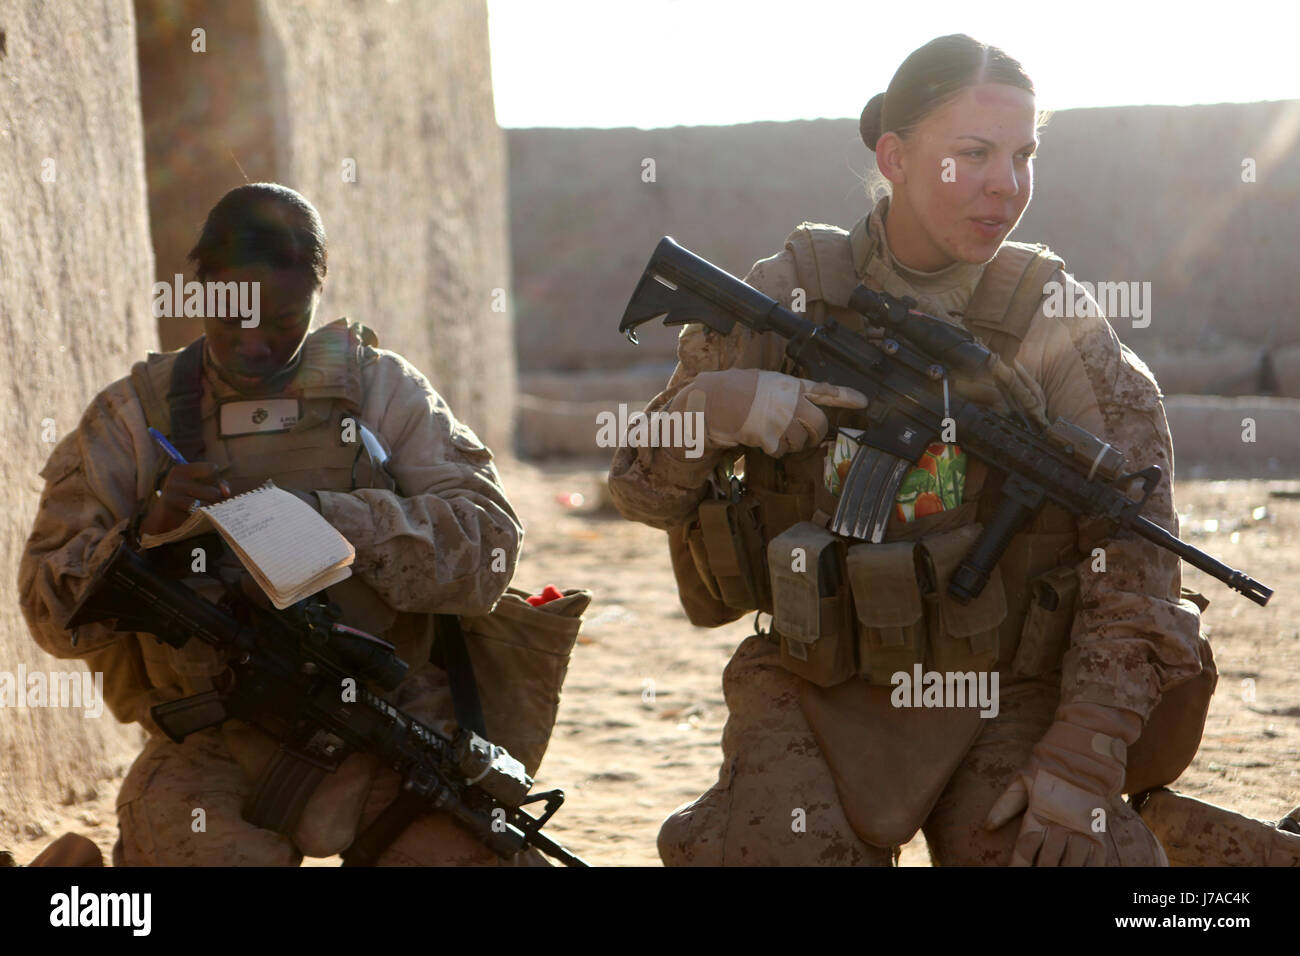 U.S. Marines assigned to the female engagement team on patrol in Afghanistan. Stock Photo